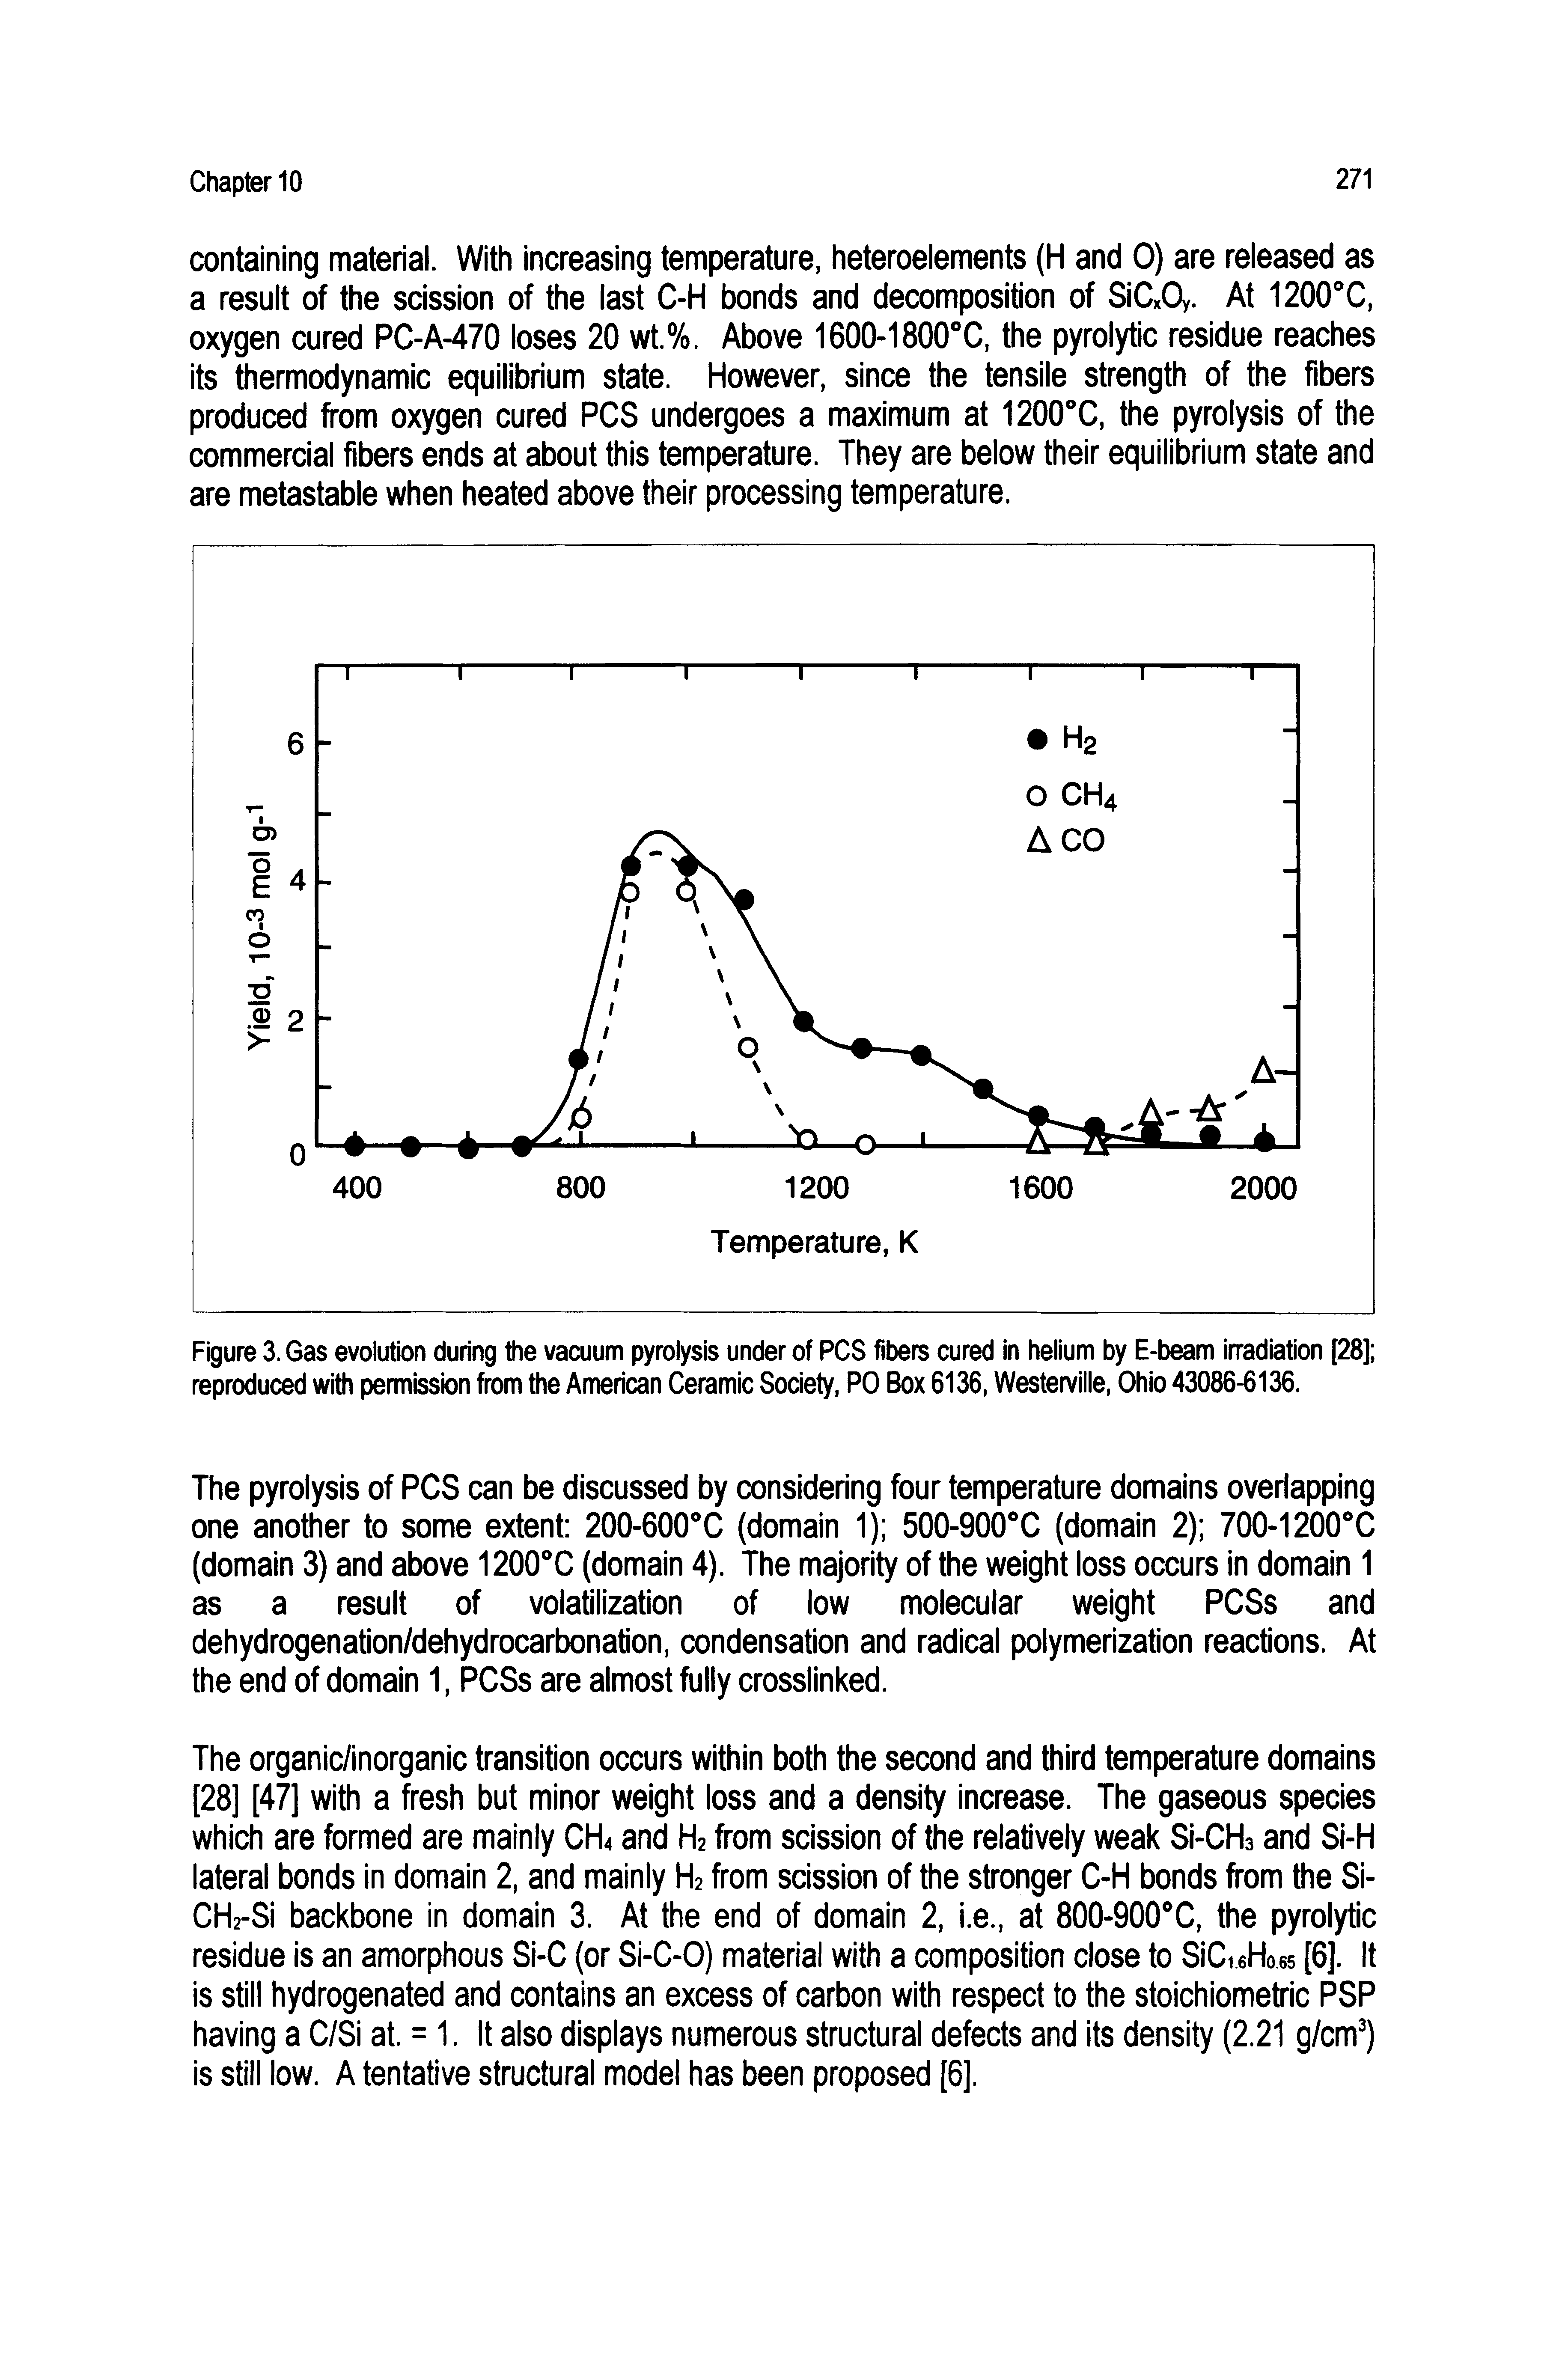 Figure 3. Gas evolution during the vacuum pyrolysis under of PCS fibers cured in heiium by E-beam irradiation [28] reproduced with permission from the American Ceramic Society, PO Box 6136, Westervlile, Ohio 43086-6136.